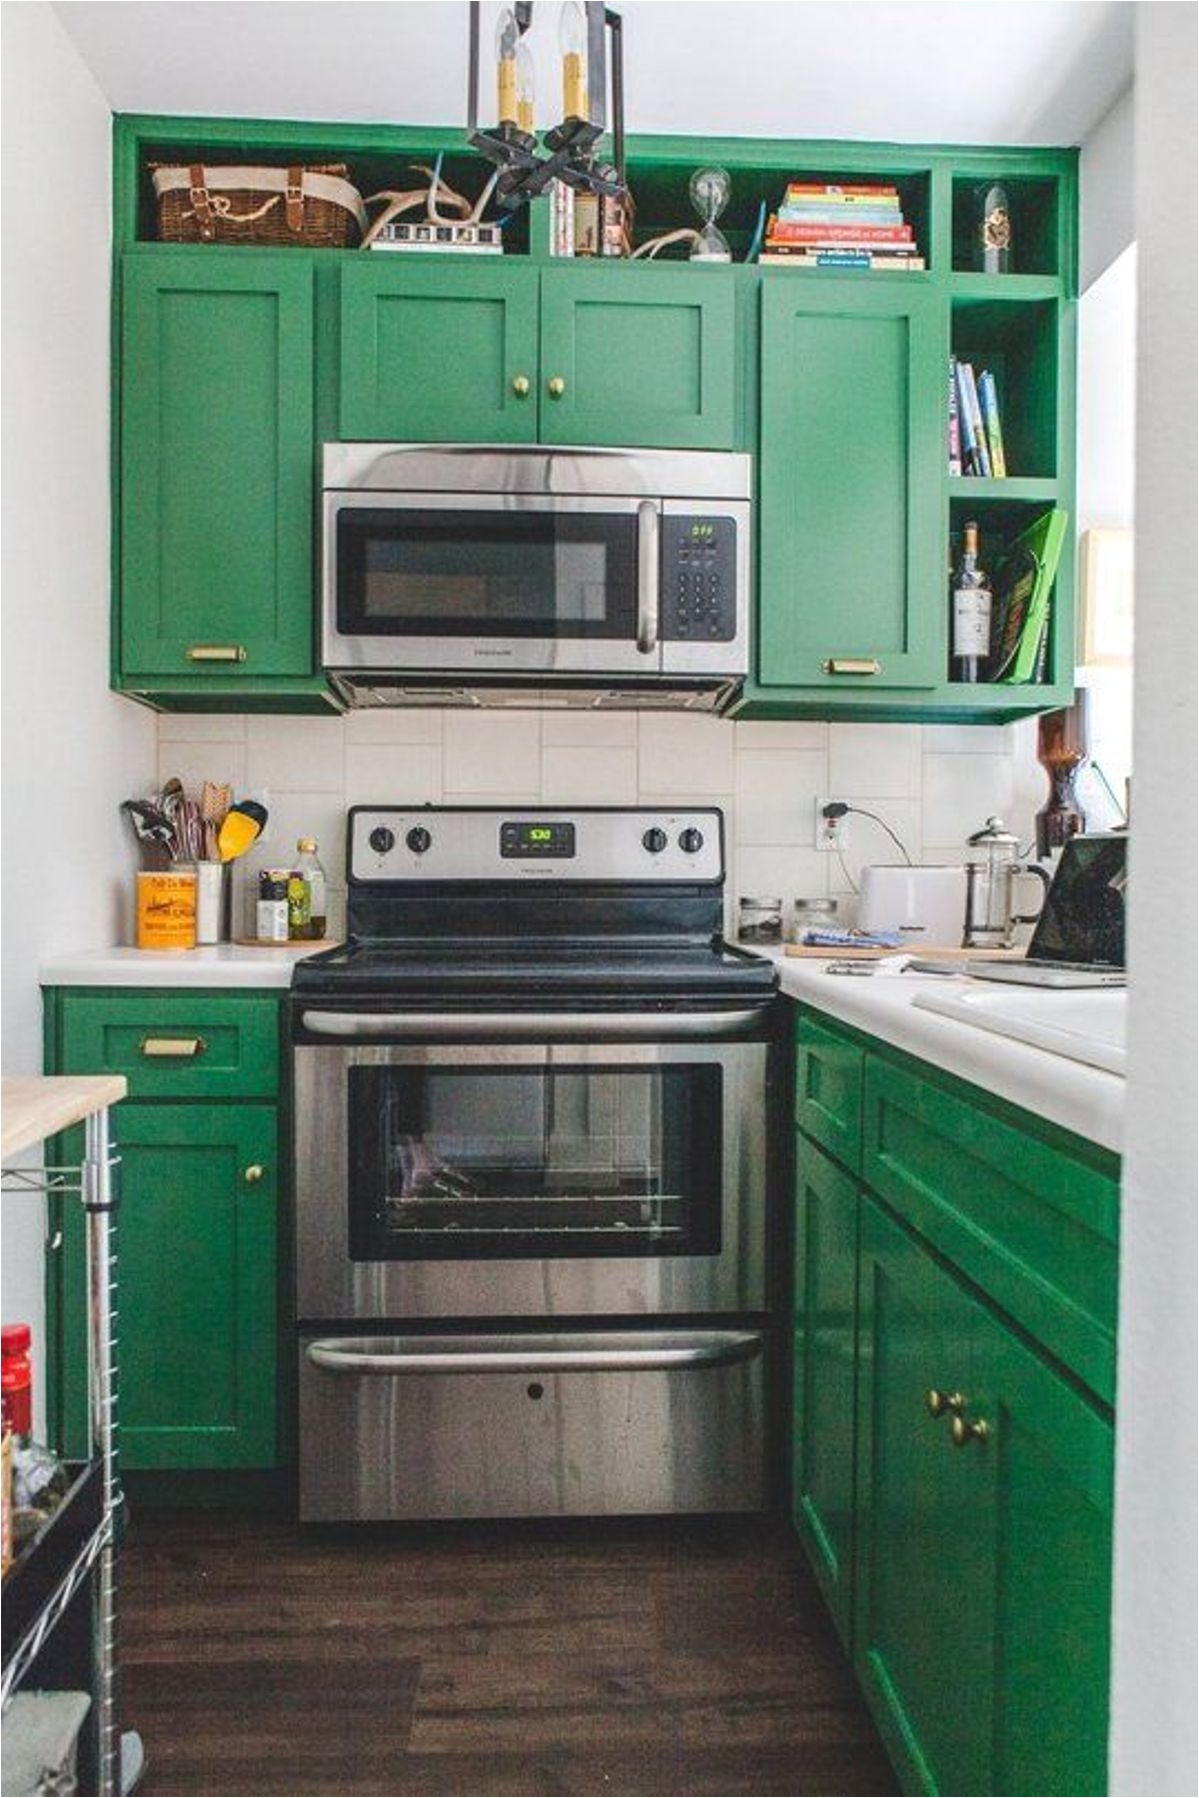 Very Small Kitchen With Green Painted Cabinets And Stainless Steel Appliances